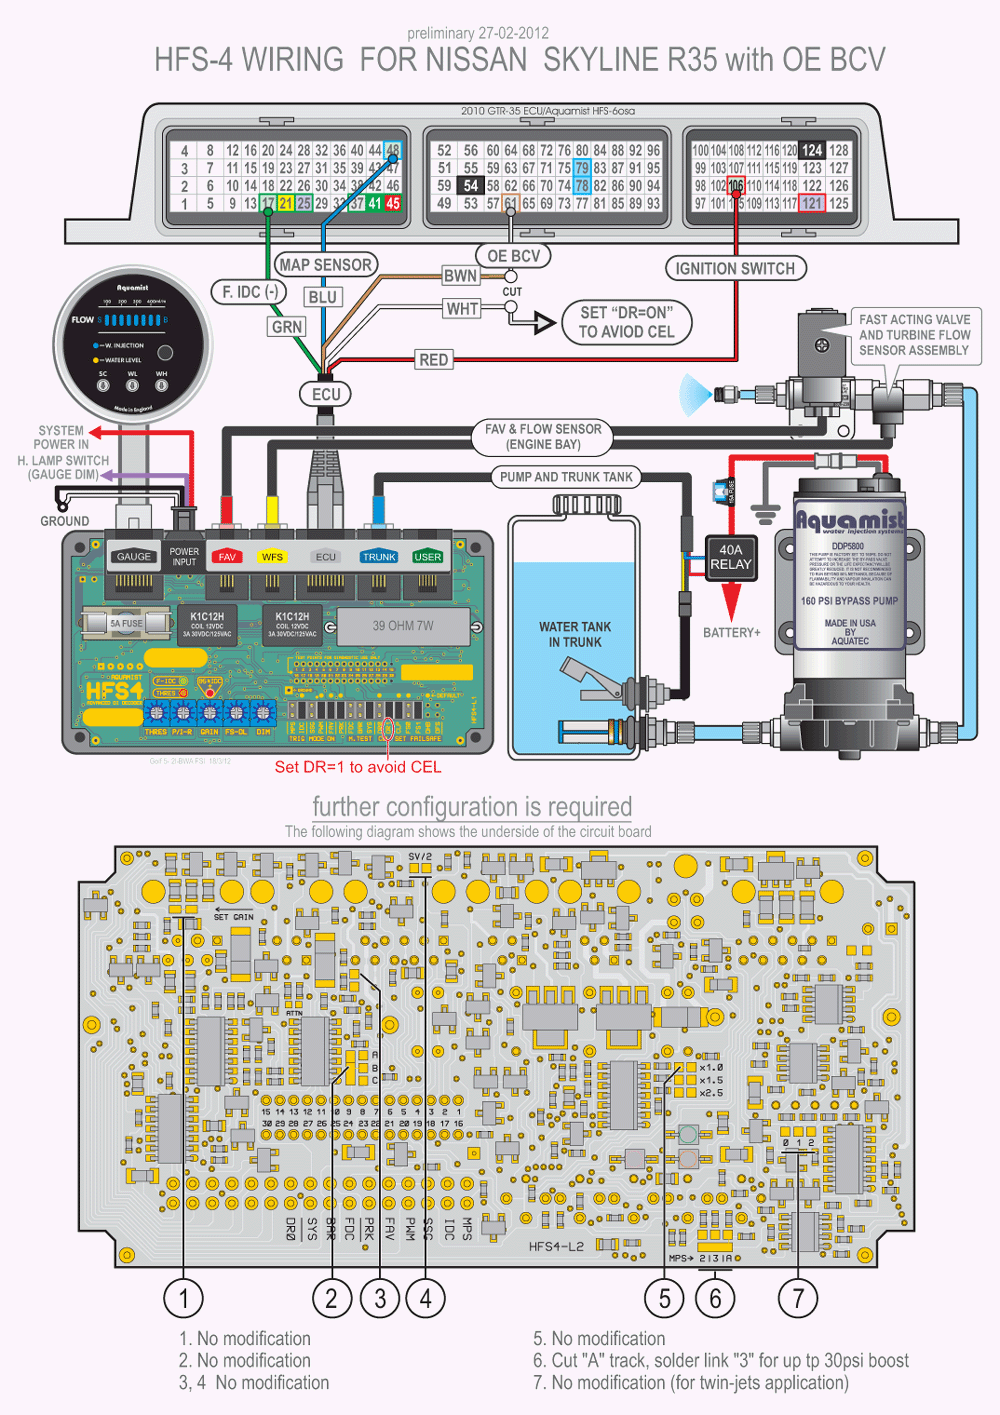 Nissan Skyline Wiring Diagrams To Hfs-3